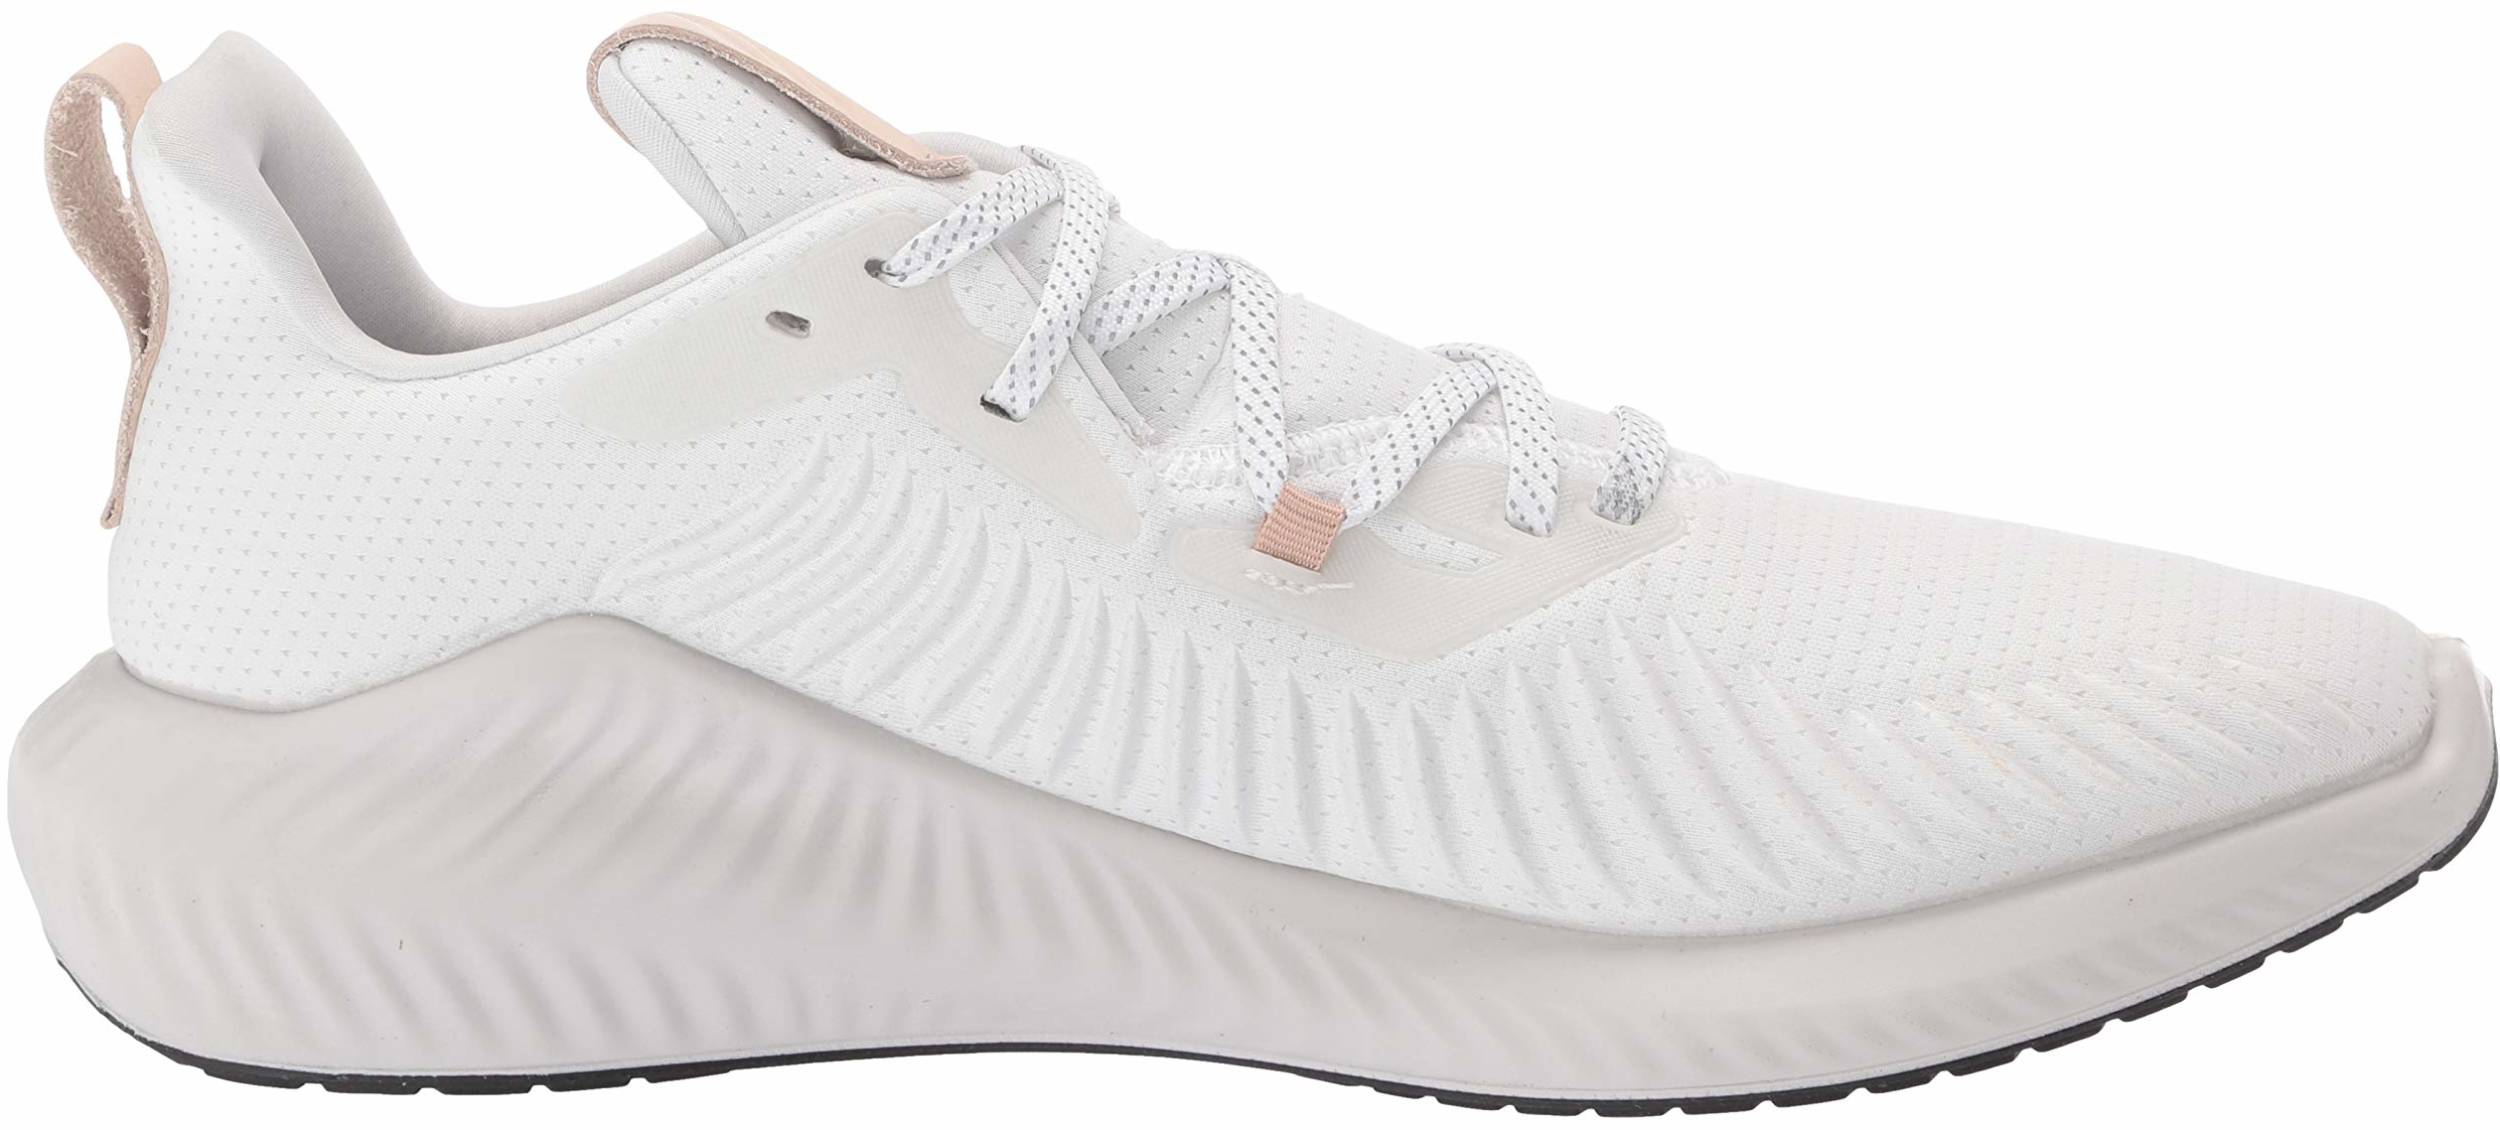 Cushioned Alphabounce Running Shoes 